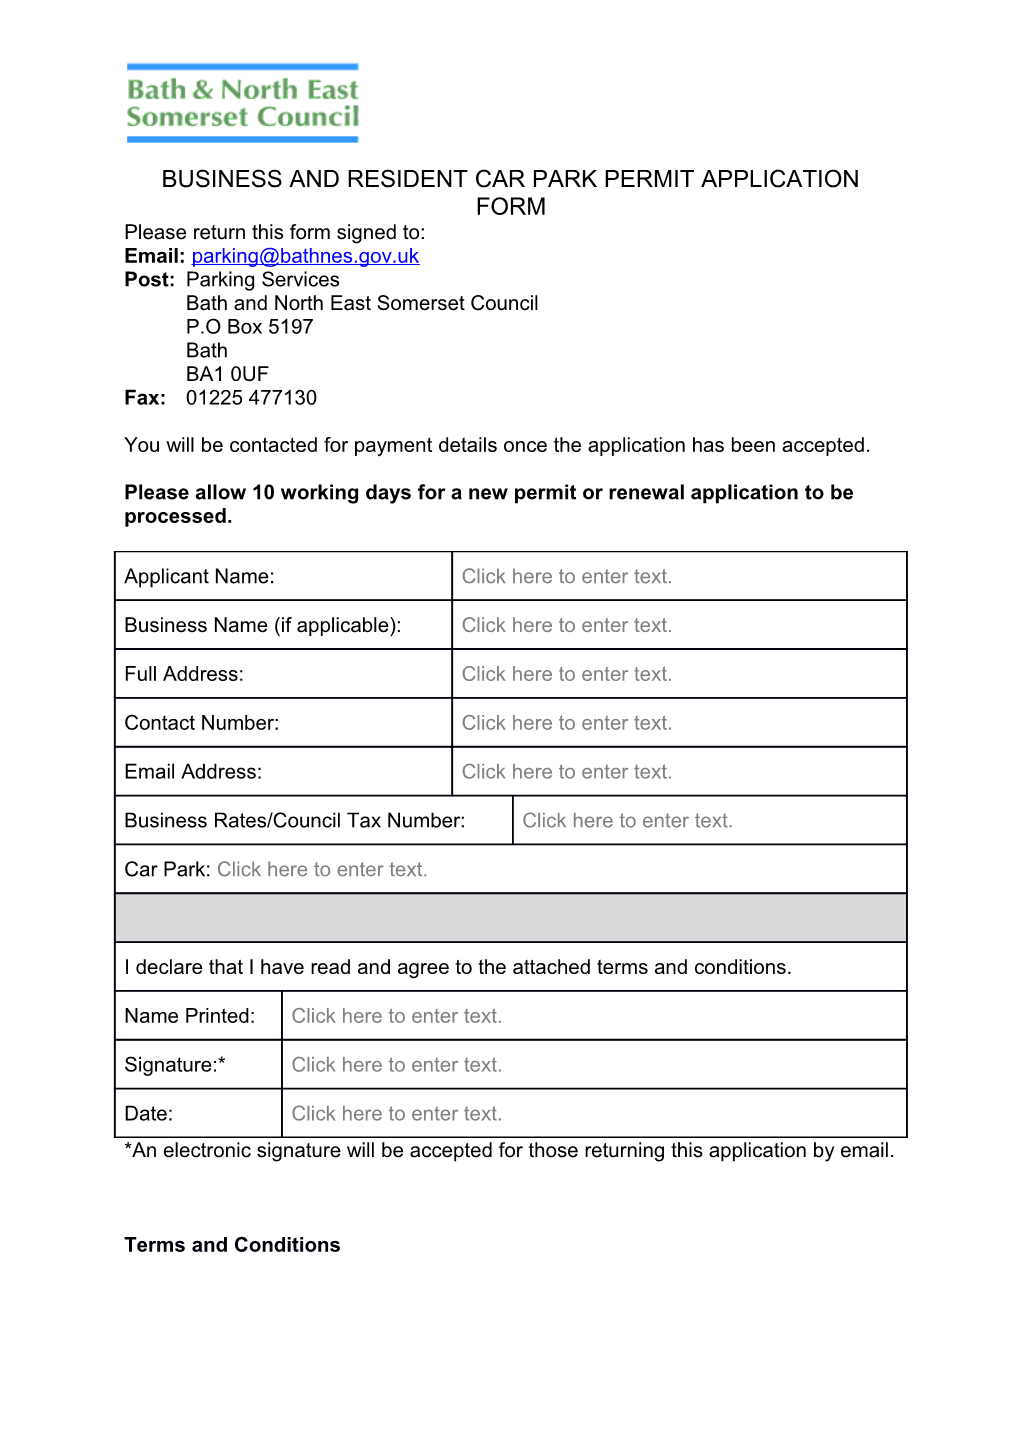 Business and Resident Car Park Permit Application Form